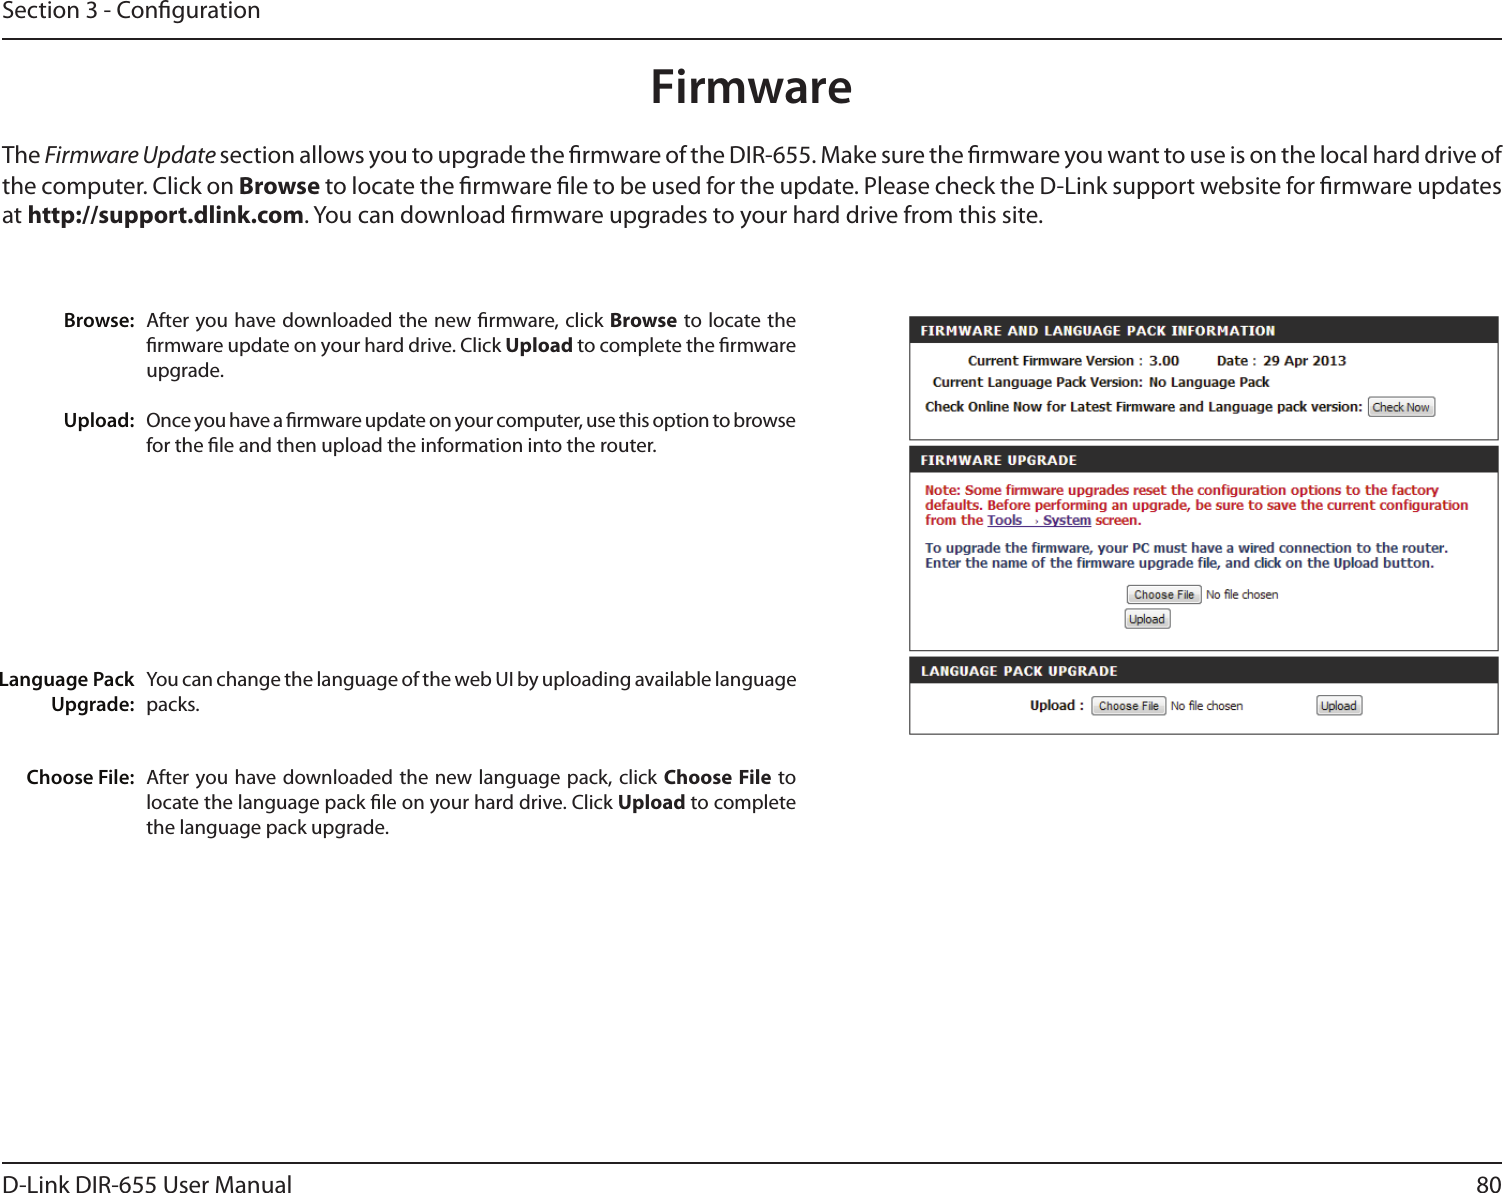 80D-Link DIR-655 User ManualSection 3 - CongurationFirmwareBrowse:Upload:After you have downloaded the new rmware, click Browse to locate the rmware update on your hard drive. Click Upload to complete the rmware upgrade.Once you have a rmware update on your computer, use this option to browse for the le and then upload the information into the router. The Firmware Update section allows you to upgrade the rmware of the DIR-655. Make sure the rmware you want to use is on the local hard drive of the computer. Click on Browse to locate the rmware le to be used for the update. Please check the D-Link support website for rmware updates at http://support.dlink.com. You can download rmware upgrades to your hard drive from this site.After you have downloaded the new  language pack,  click Choose File to locate the language pack le on your hard drive. Click Upload to complete the language pack upgrade.You can change the language of the web UI by uploading available language packs.Choose File:Language Pack Upgrade: